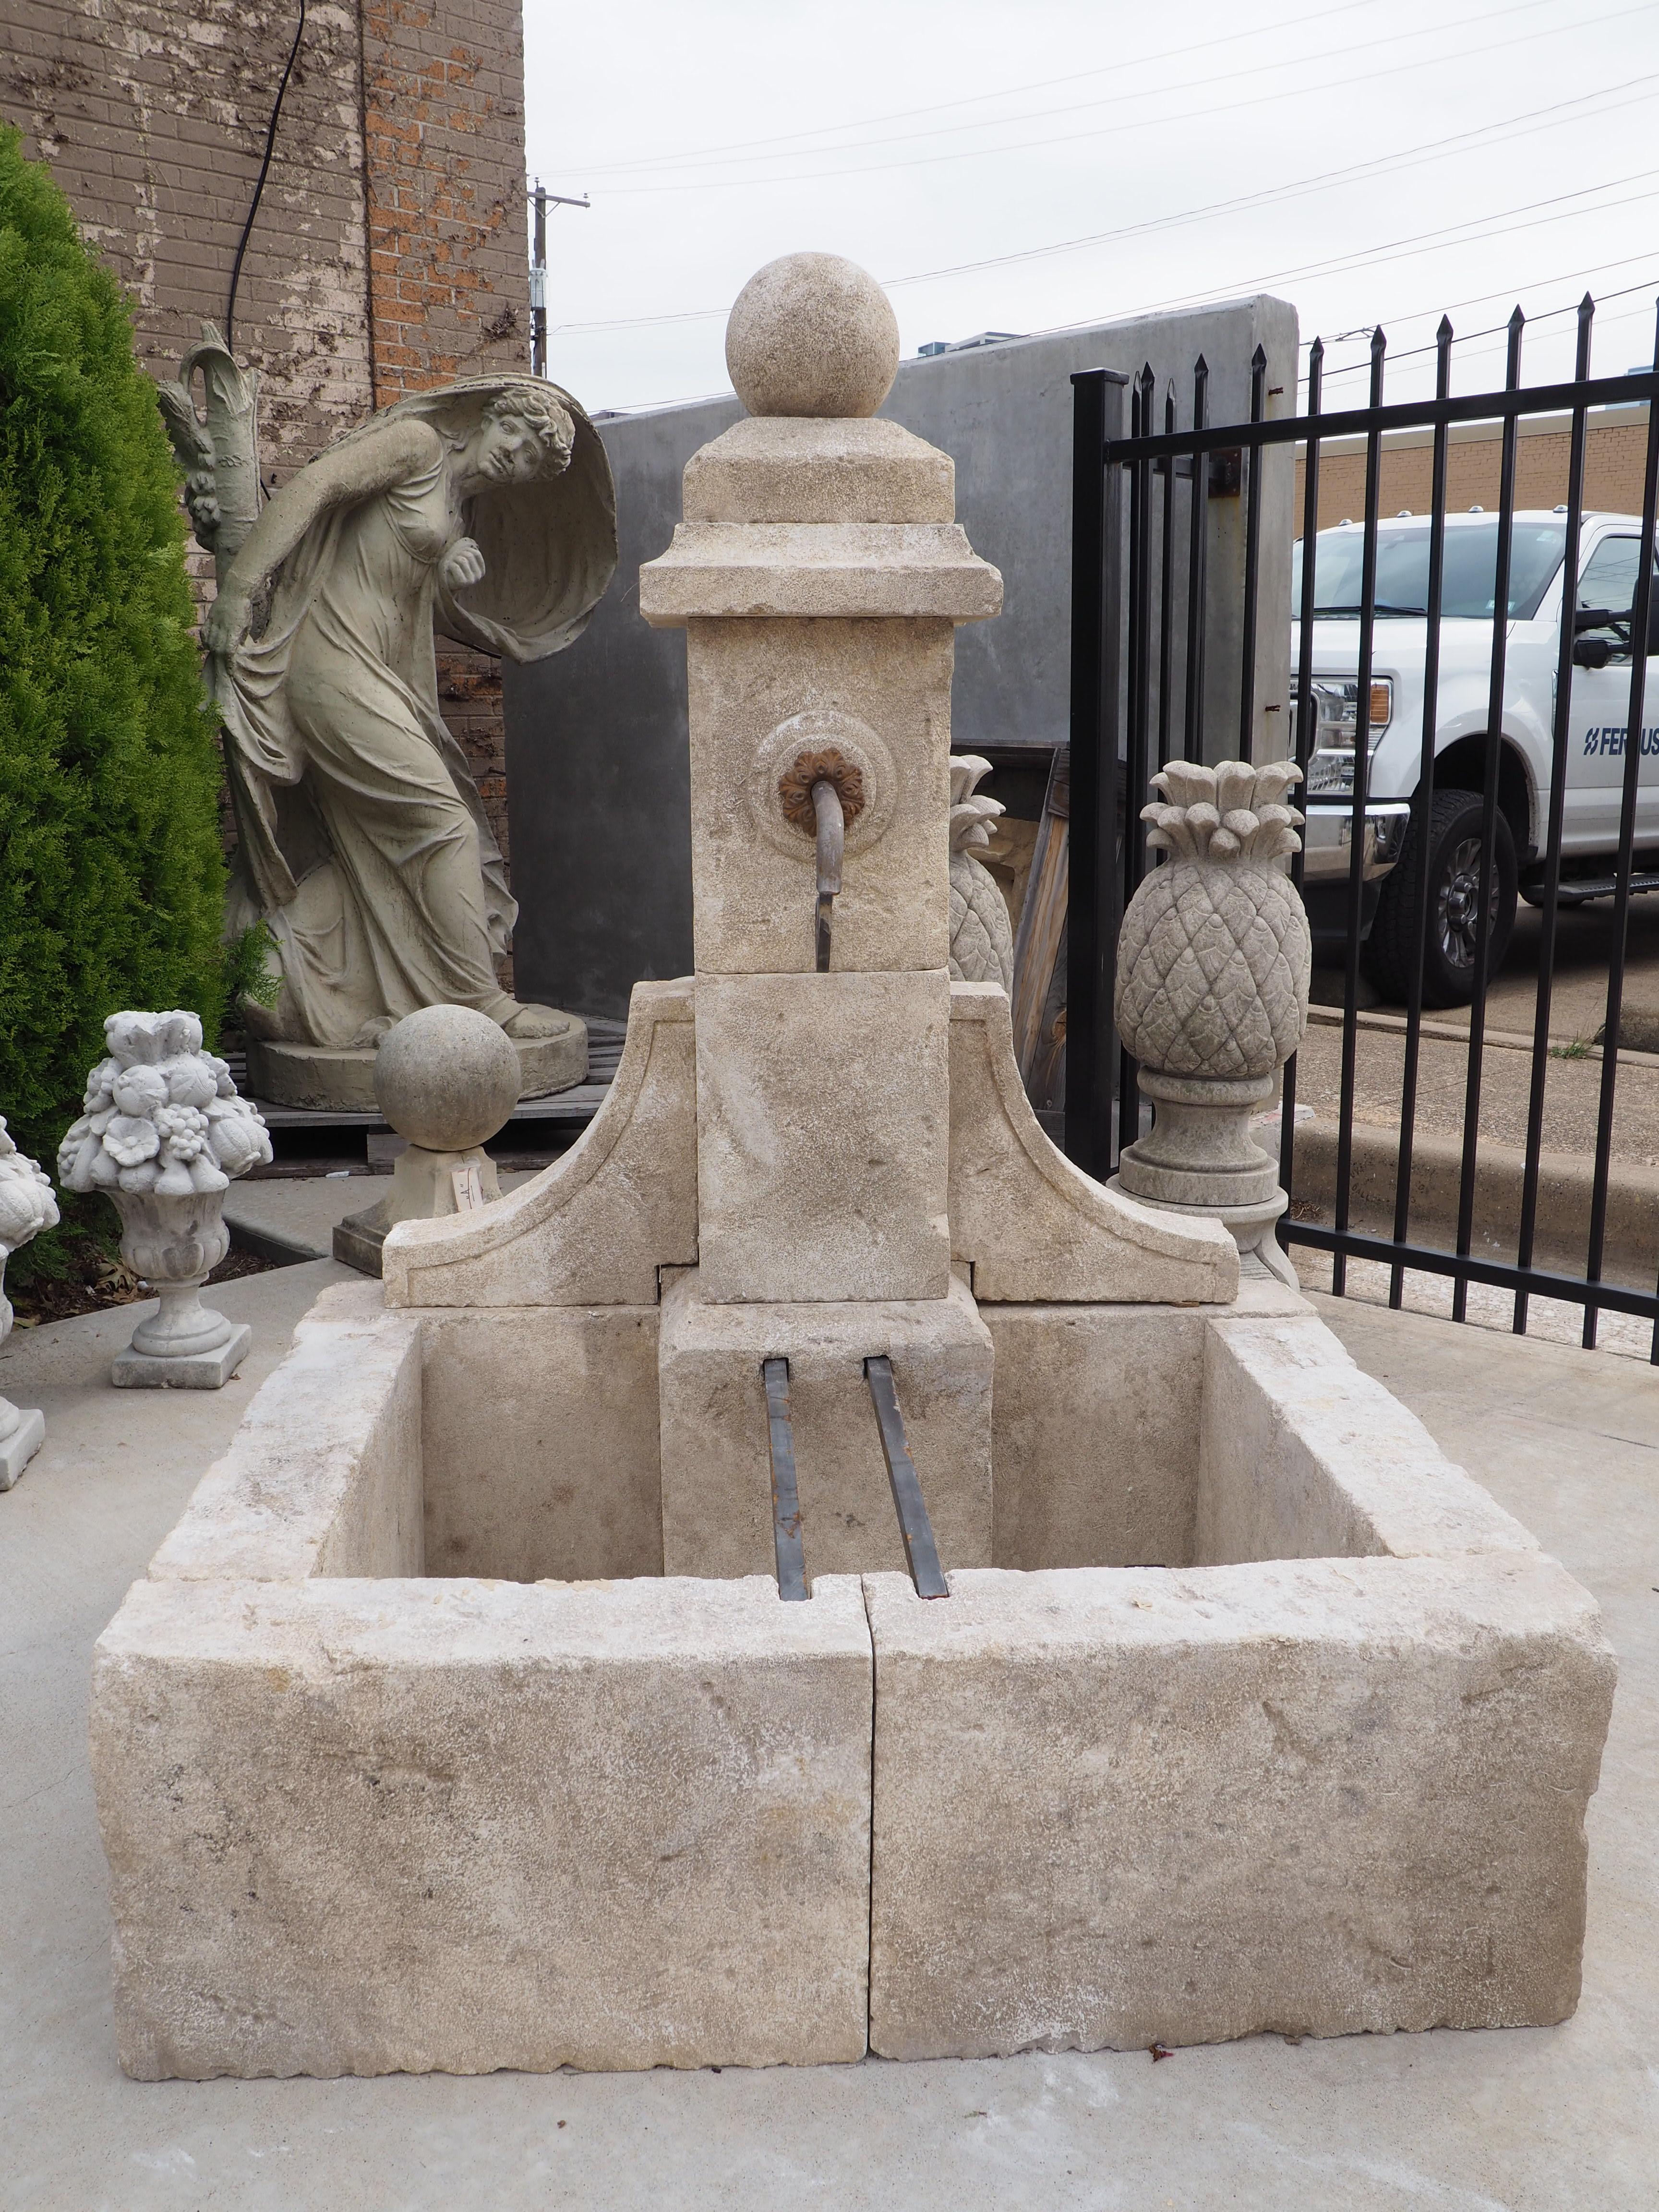 Hand-carved in Provence, France, from 14 pieces of limestone, this single pillar garden fountain features subtle curves, adding elegance to the linear rectangular basin.

A ball finial with a flattened bottom rests on top of a rectangular plinth